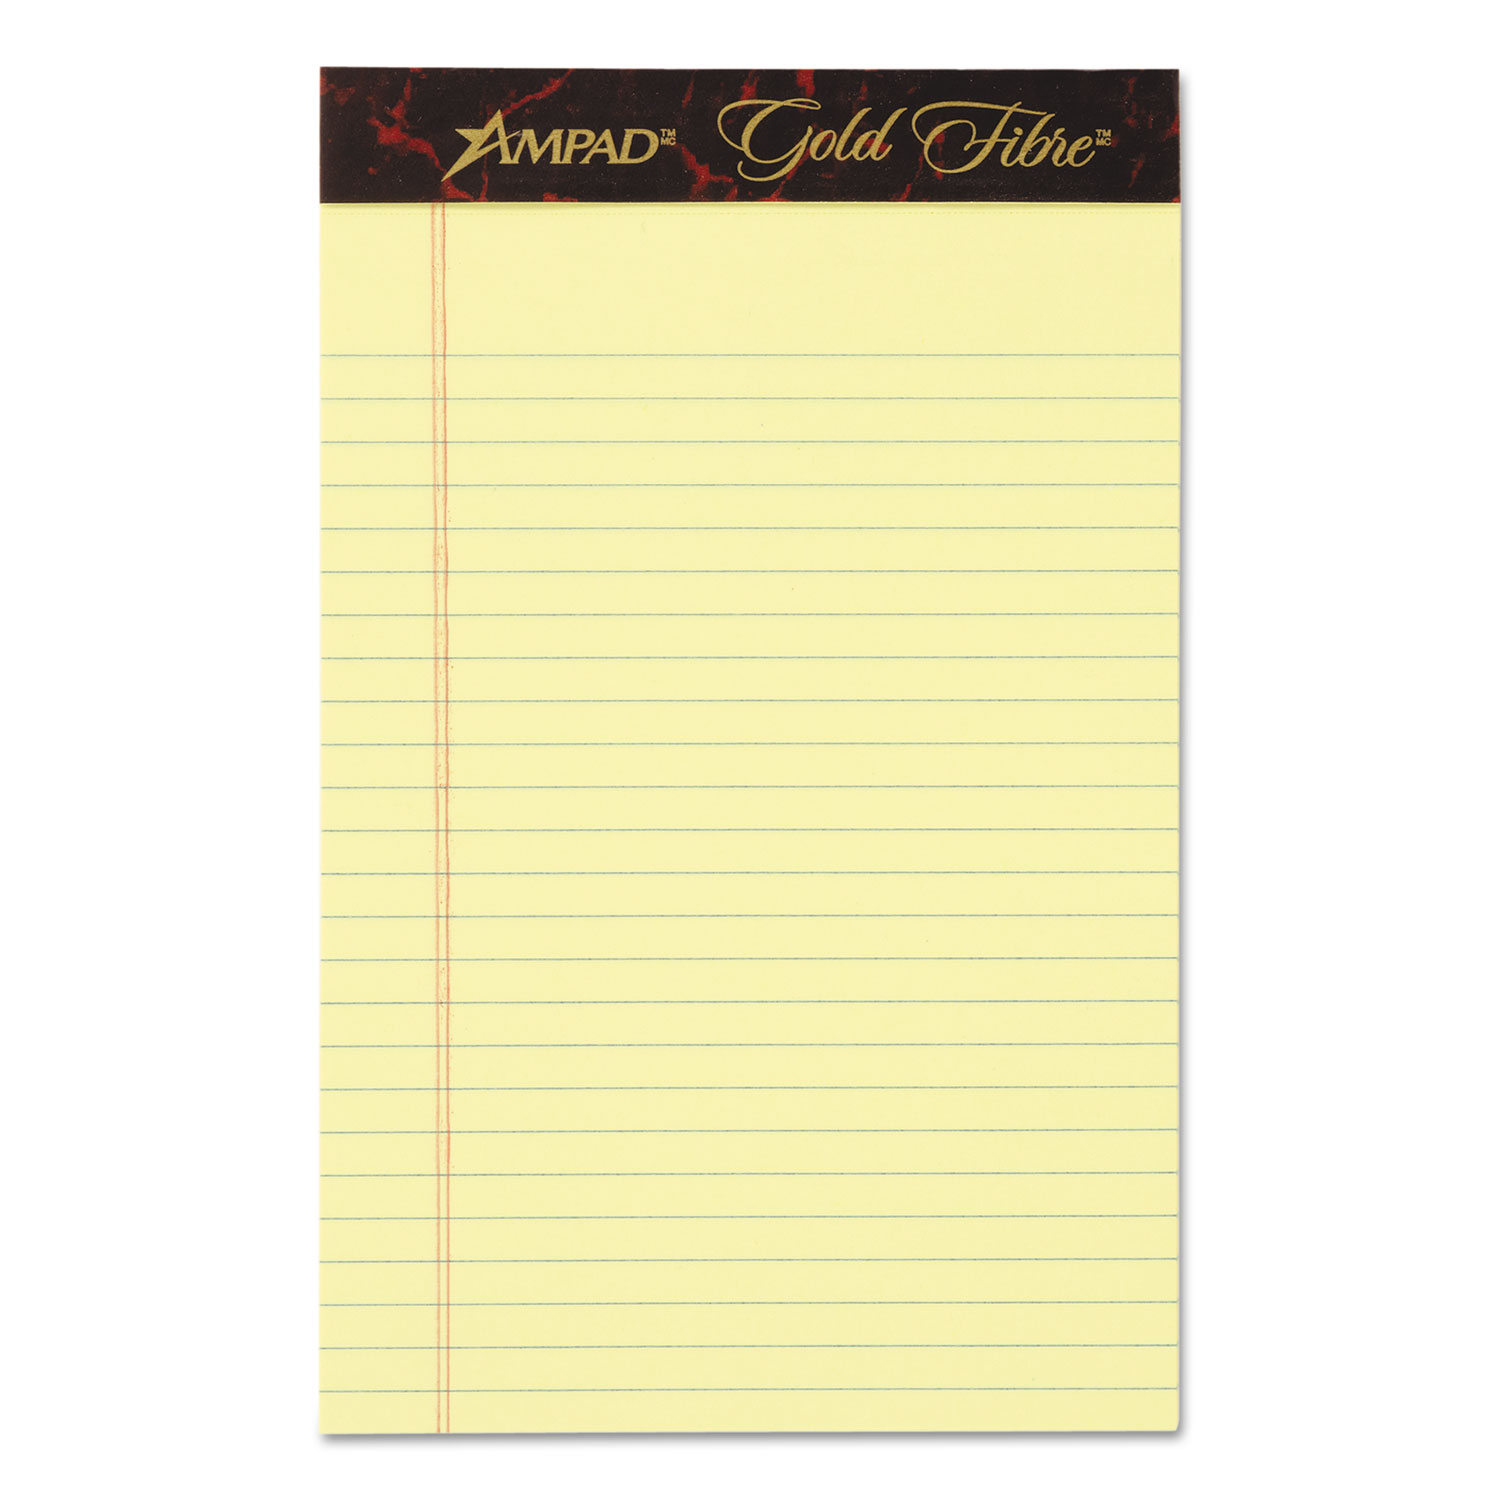  Ampad 20-004R Gold Fibre Quality Writing Pads, Medium/College Rule, 5 x 8, Canary, 50 Sheets, Dozen (TOP20004) 